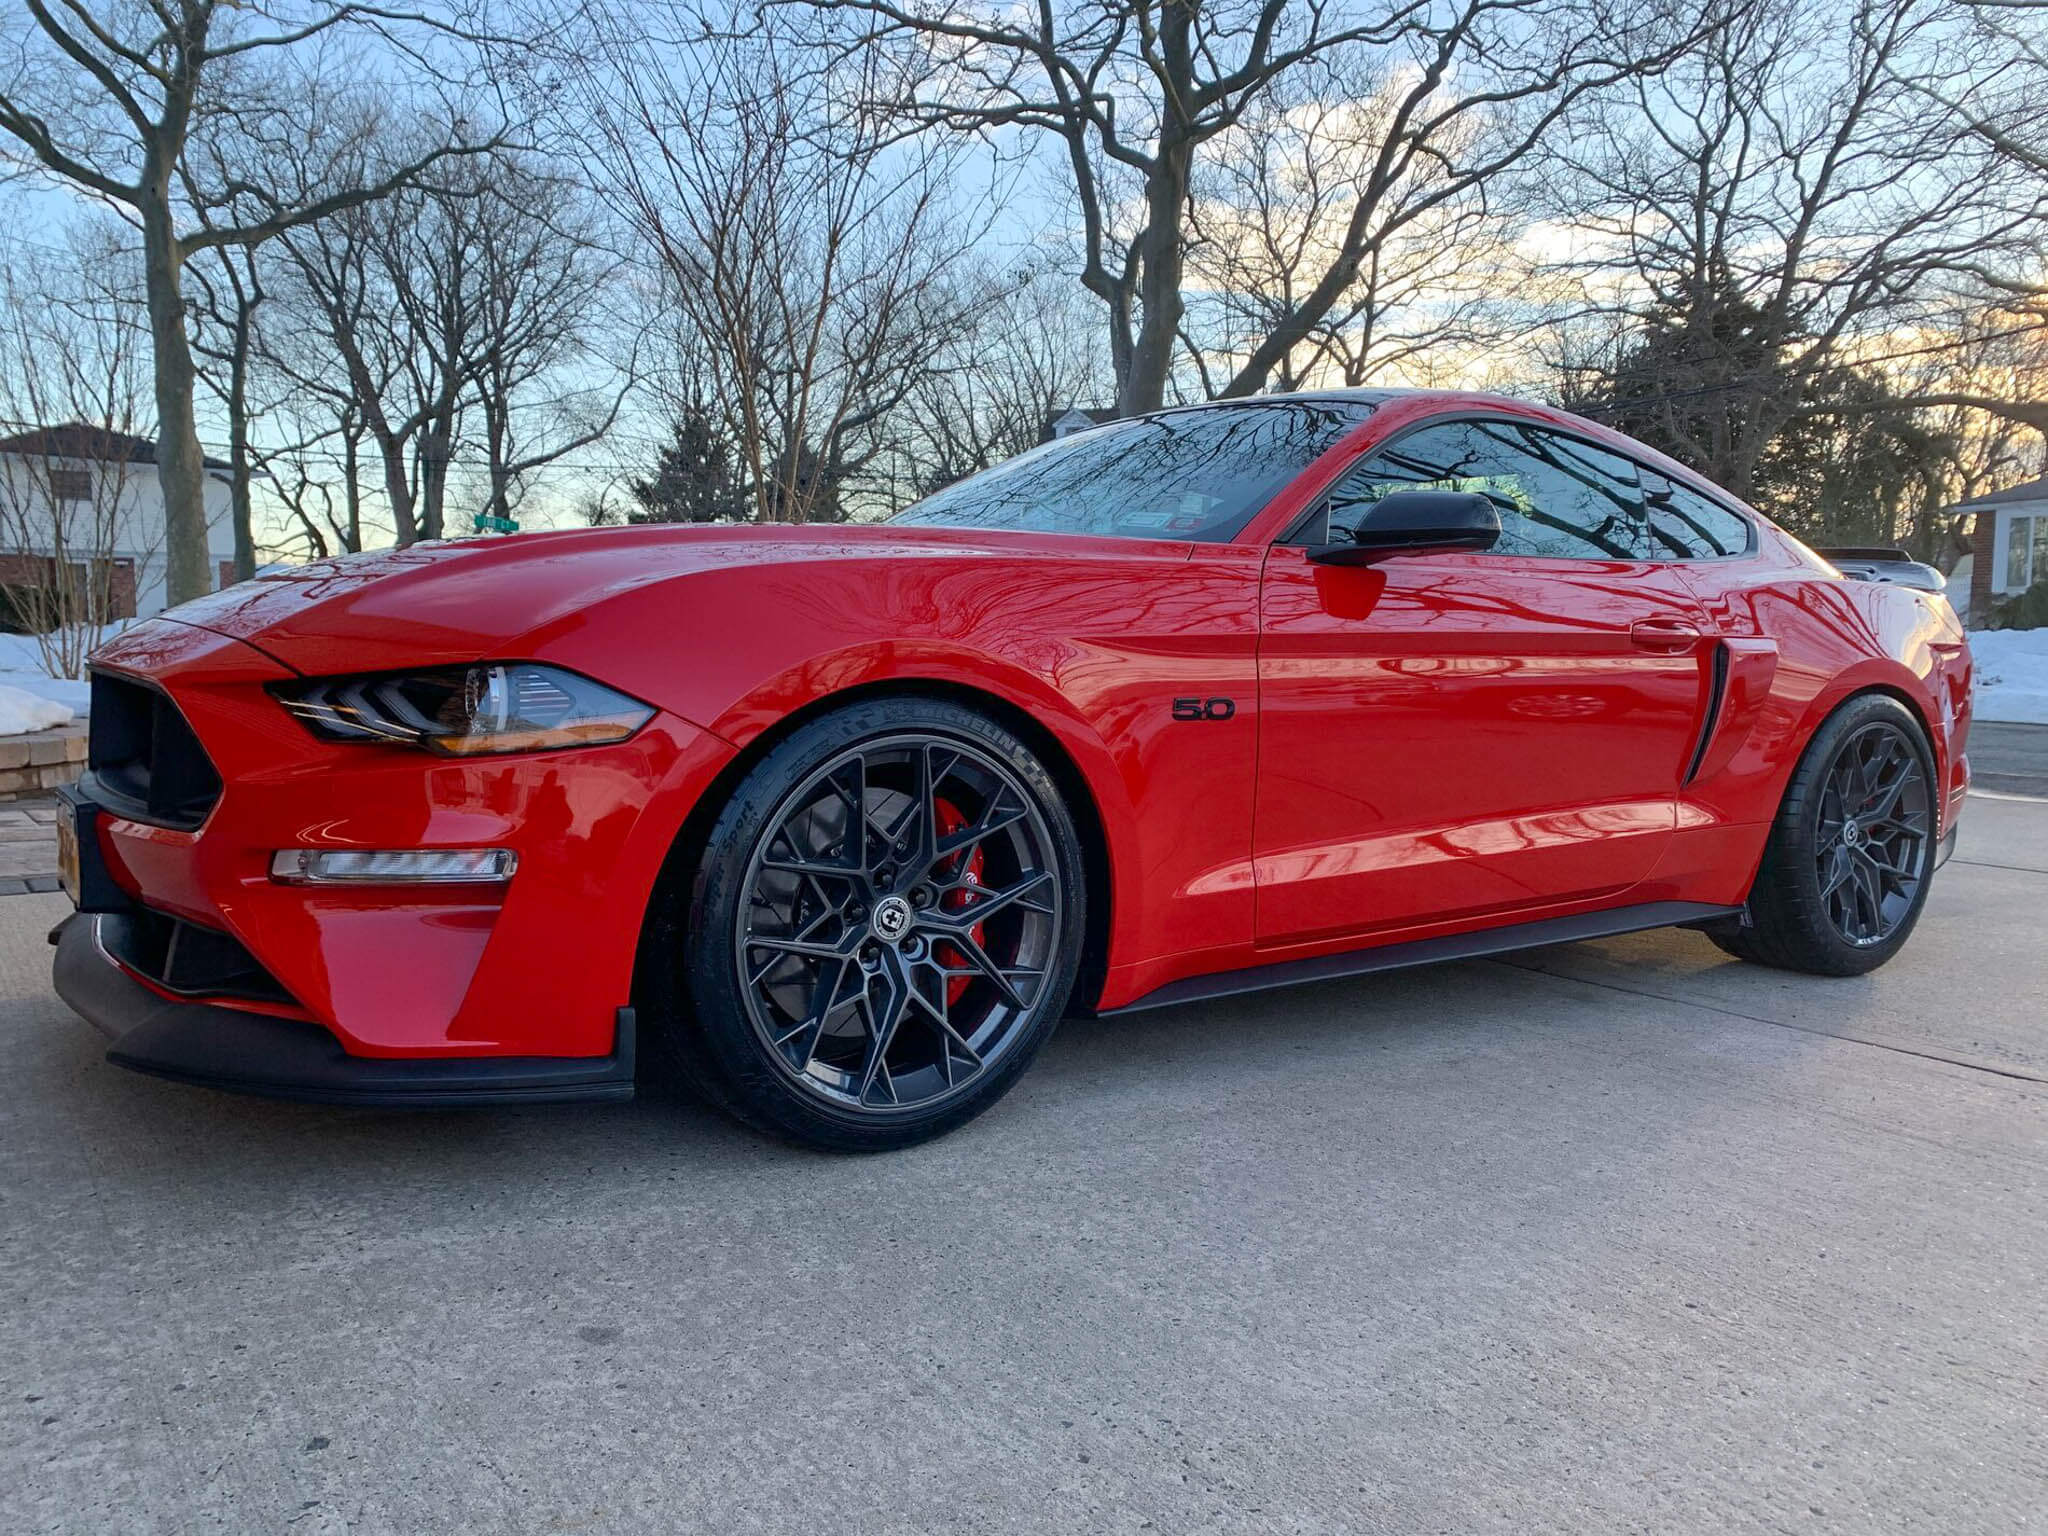 S650 Mustang UP TO $775 OFF on HRE Flow Form Wheels - HRE FF28 FF21 FF11 FF10 FF04 - Vibe Motorsports 1